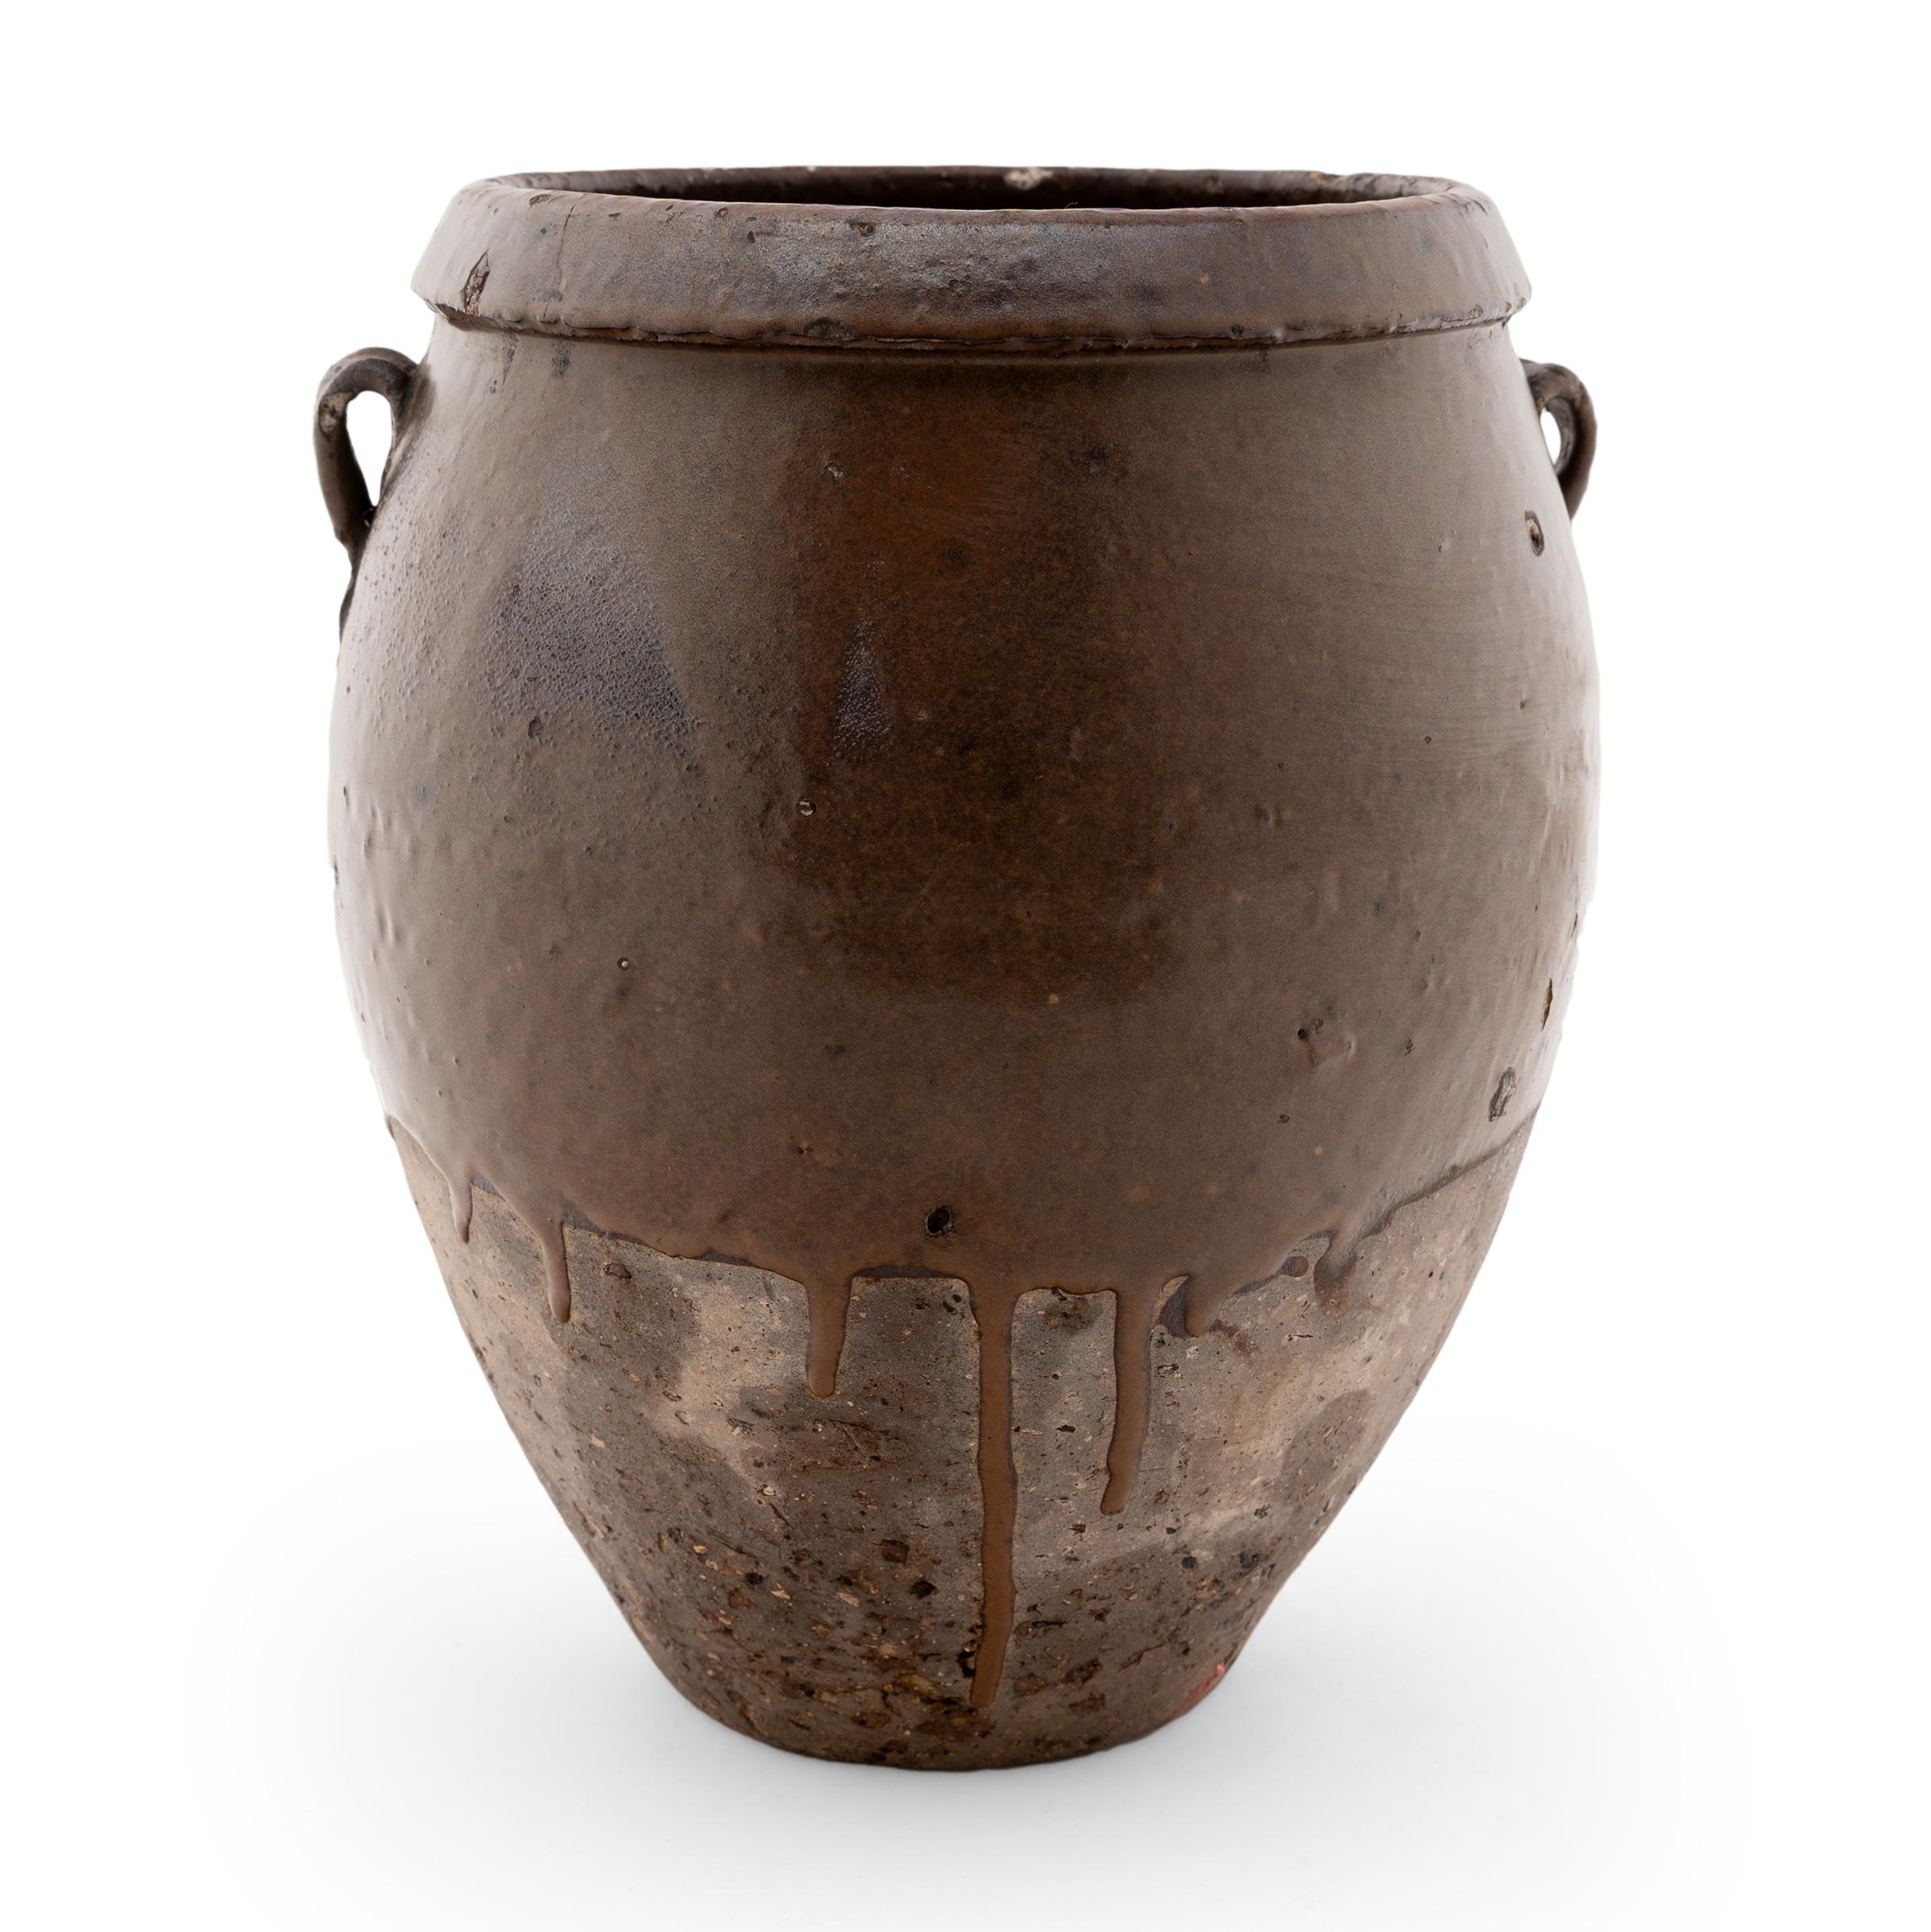 This early 20th-century vessel emulates the full-bodied shapes and unusual glazing found in ancient ceramics. A thick brown glaze clings to the upper half of the jar, dripping to a stop and leaving the lower half mostly unglazed. Some glaze seems to